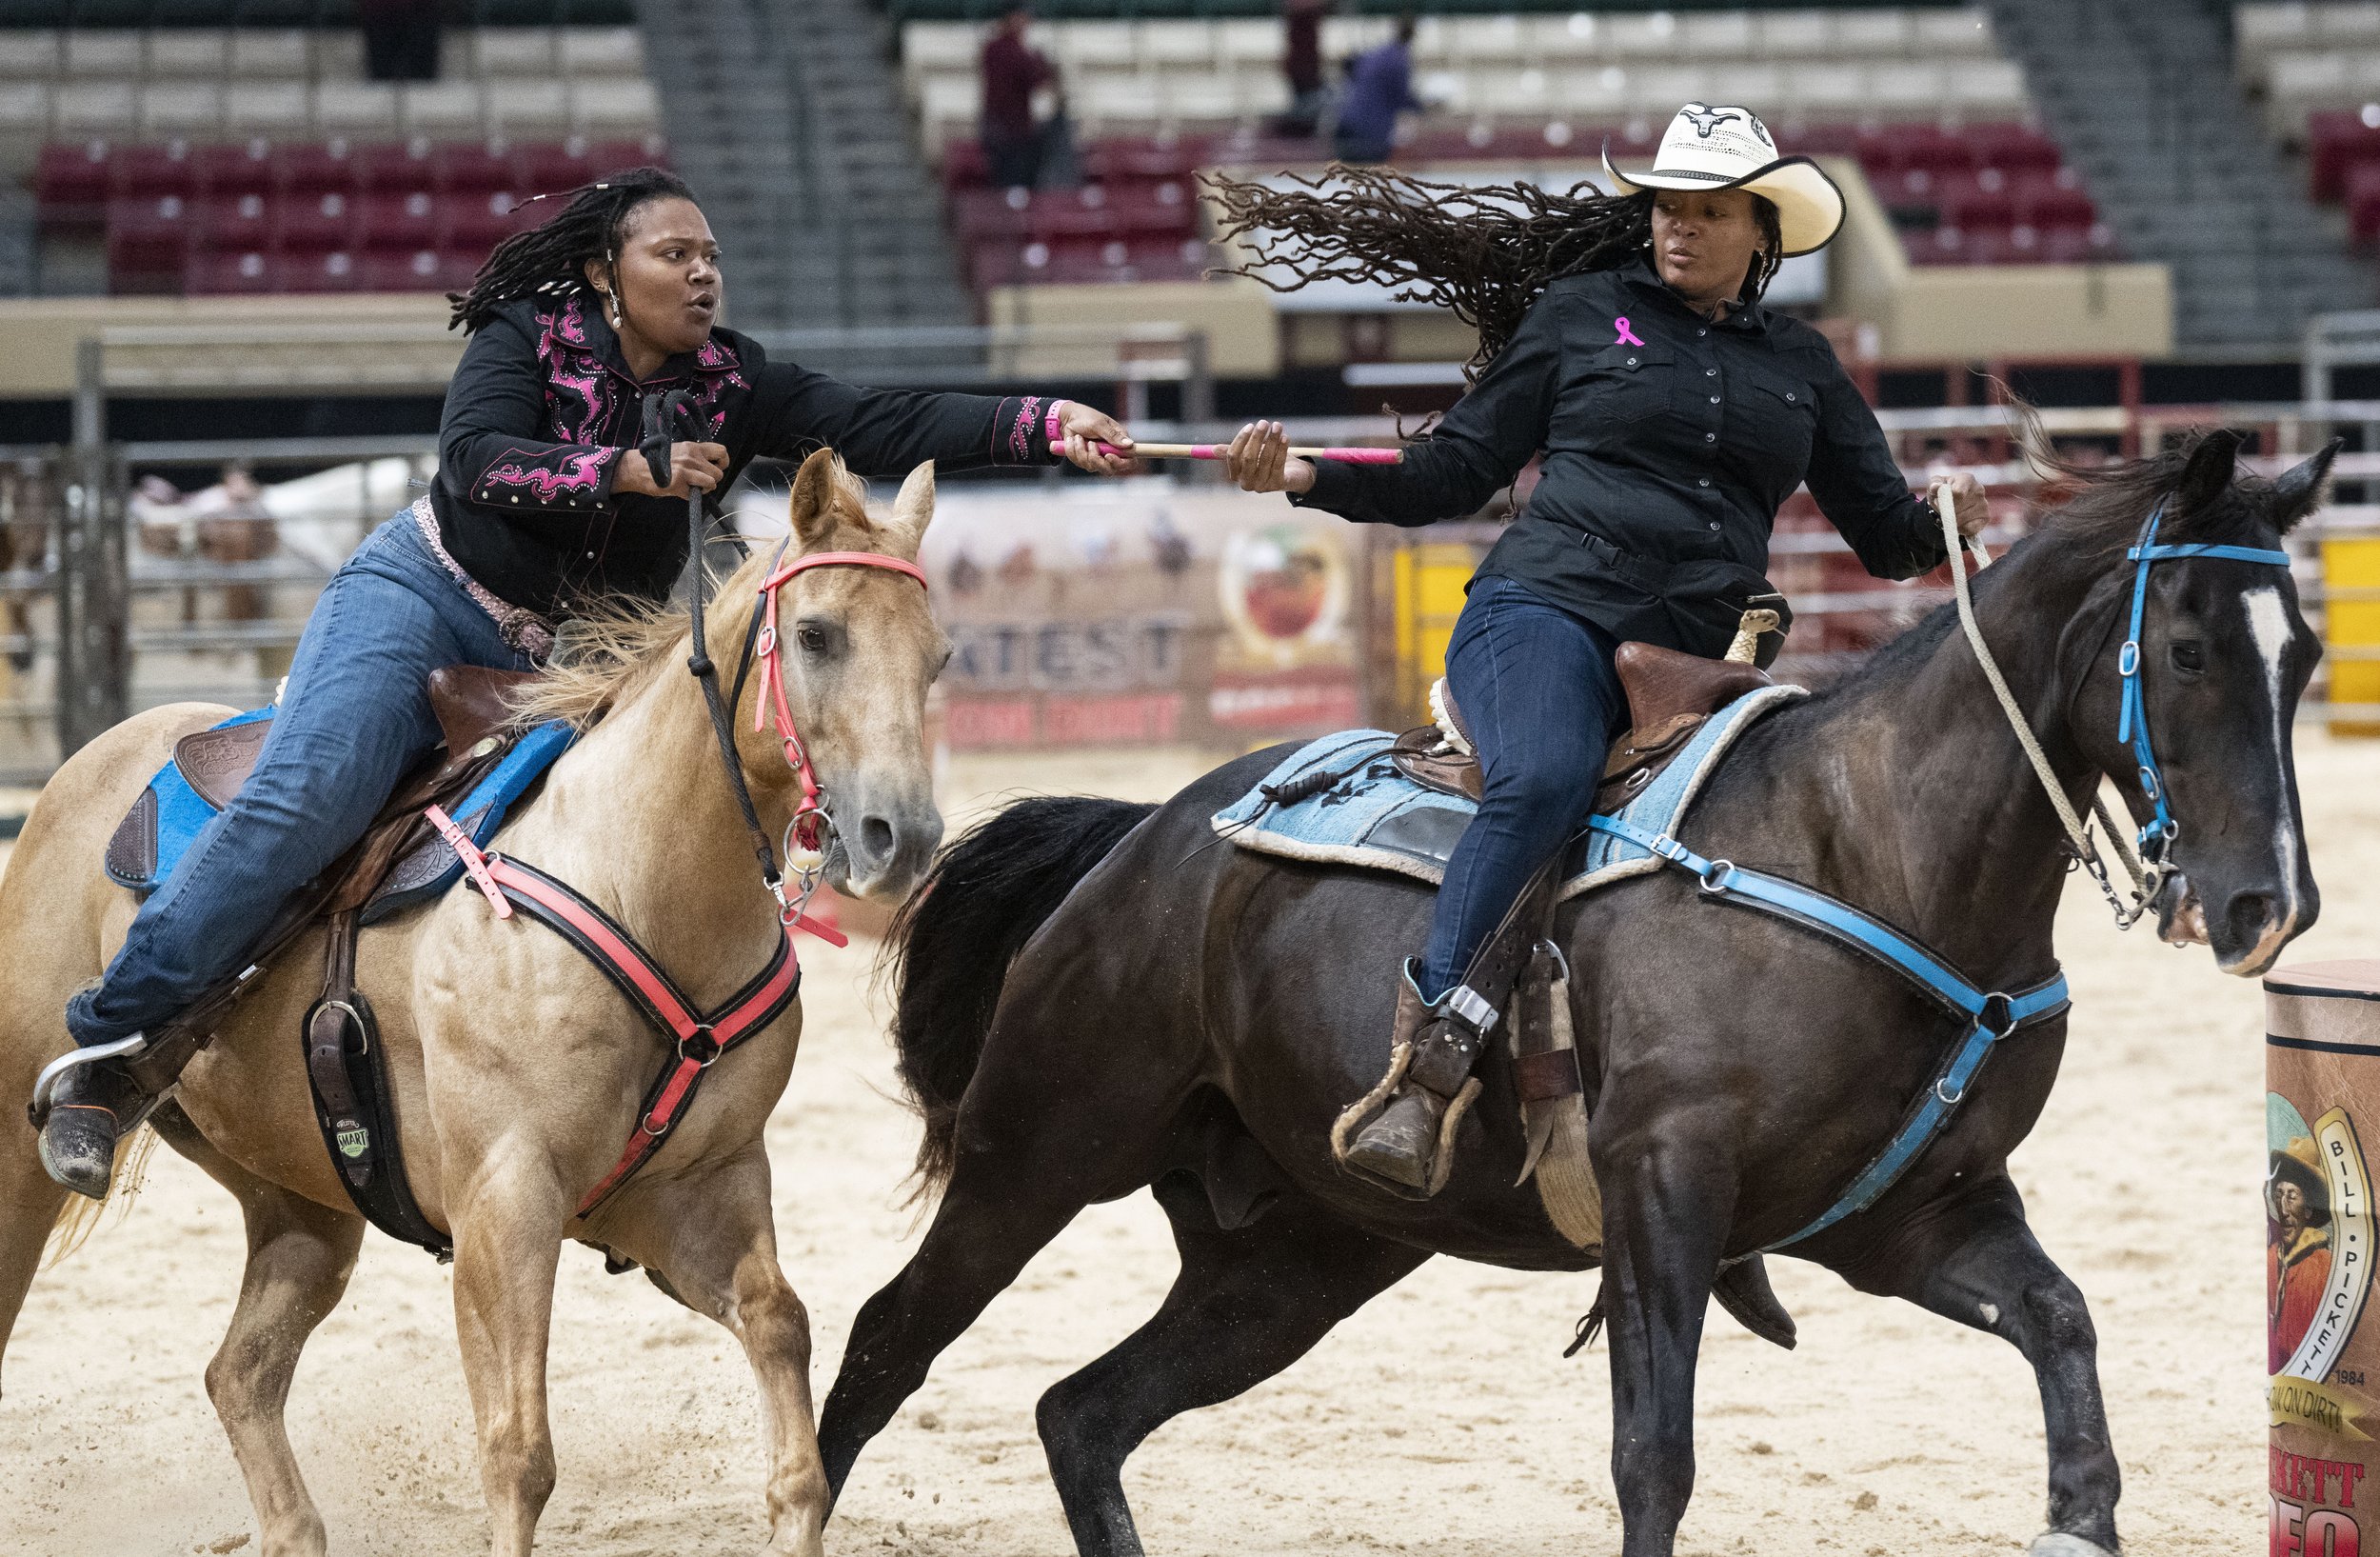  Brittaney "Britt Brat" Logan passes a baton to Kisha "KB" Bowles while competing in the relay racing during the Bill Pickett Invitational Rodeo, at the Show Place Arena. 